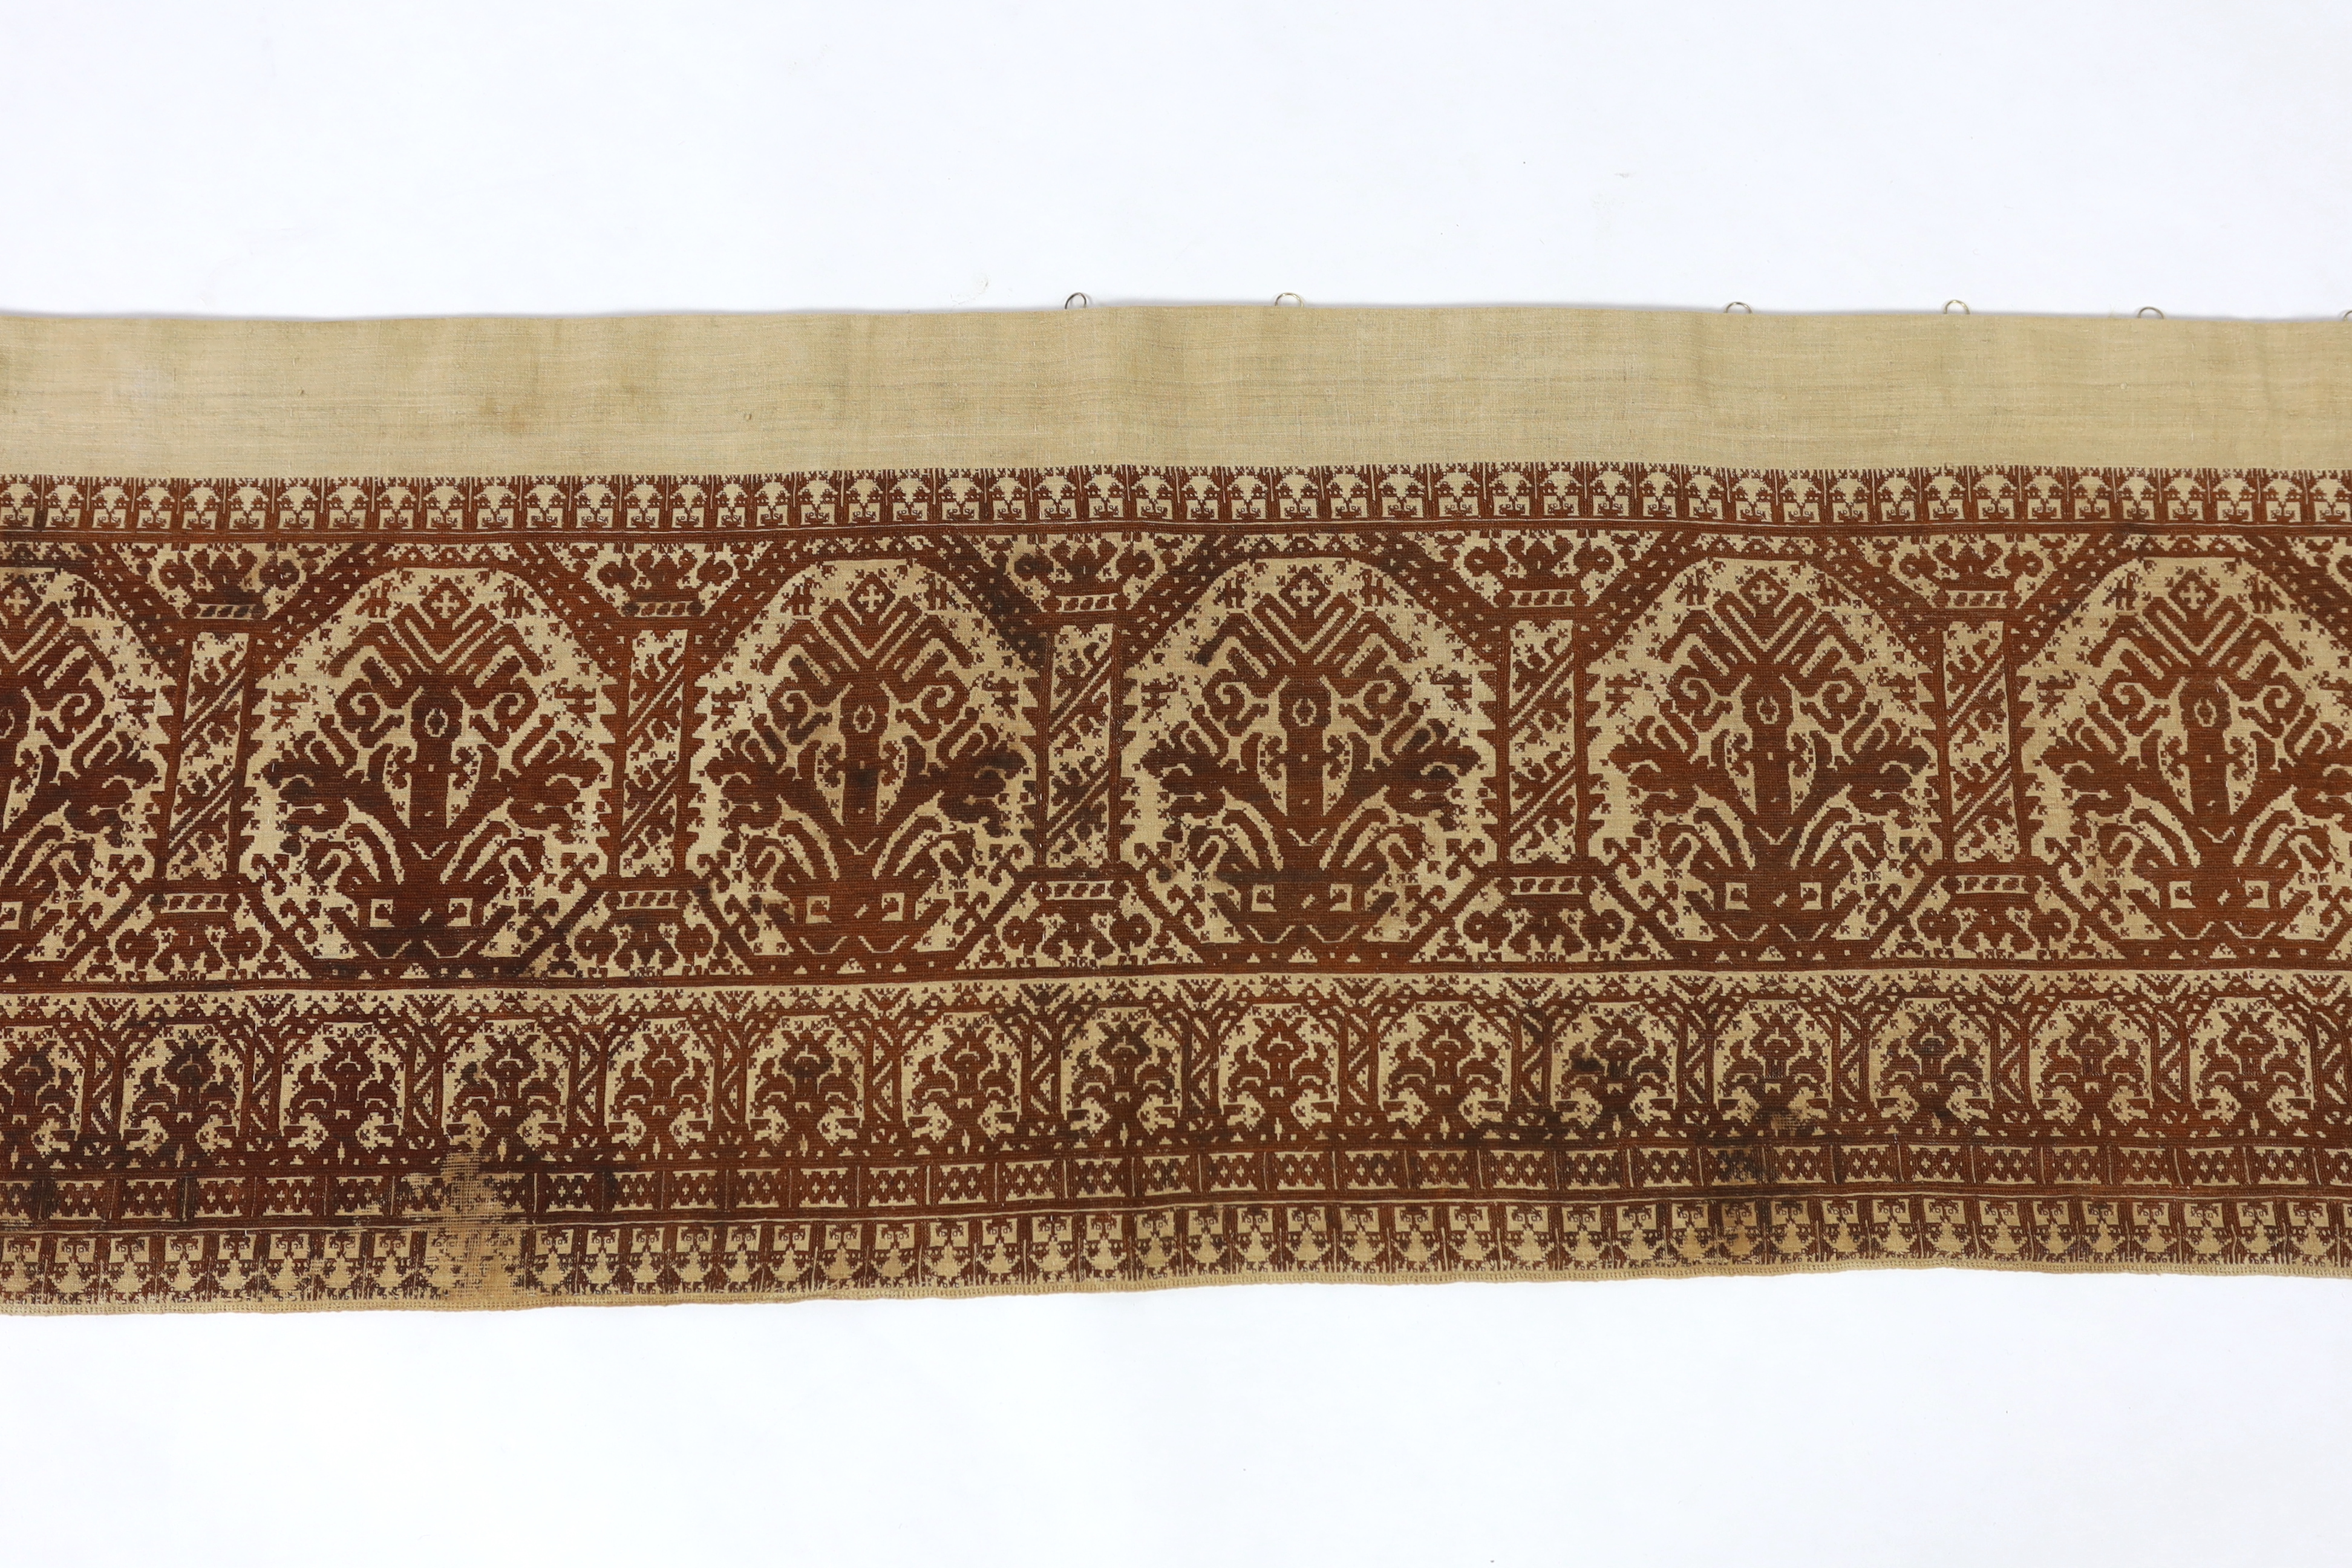 An early 19th century long Greek Islands cross stitch pelmet (hanging), embroidered on coarse linen with brown silk, using cross stitch, designed in horizontal rows of similar symbols, the lower row being a smaller size,